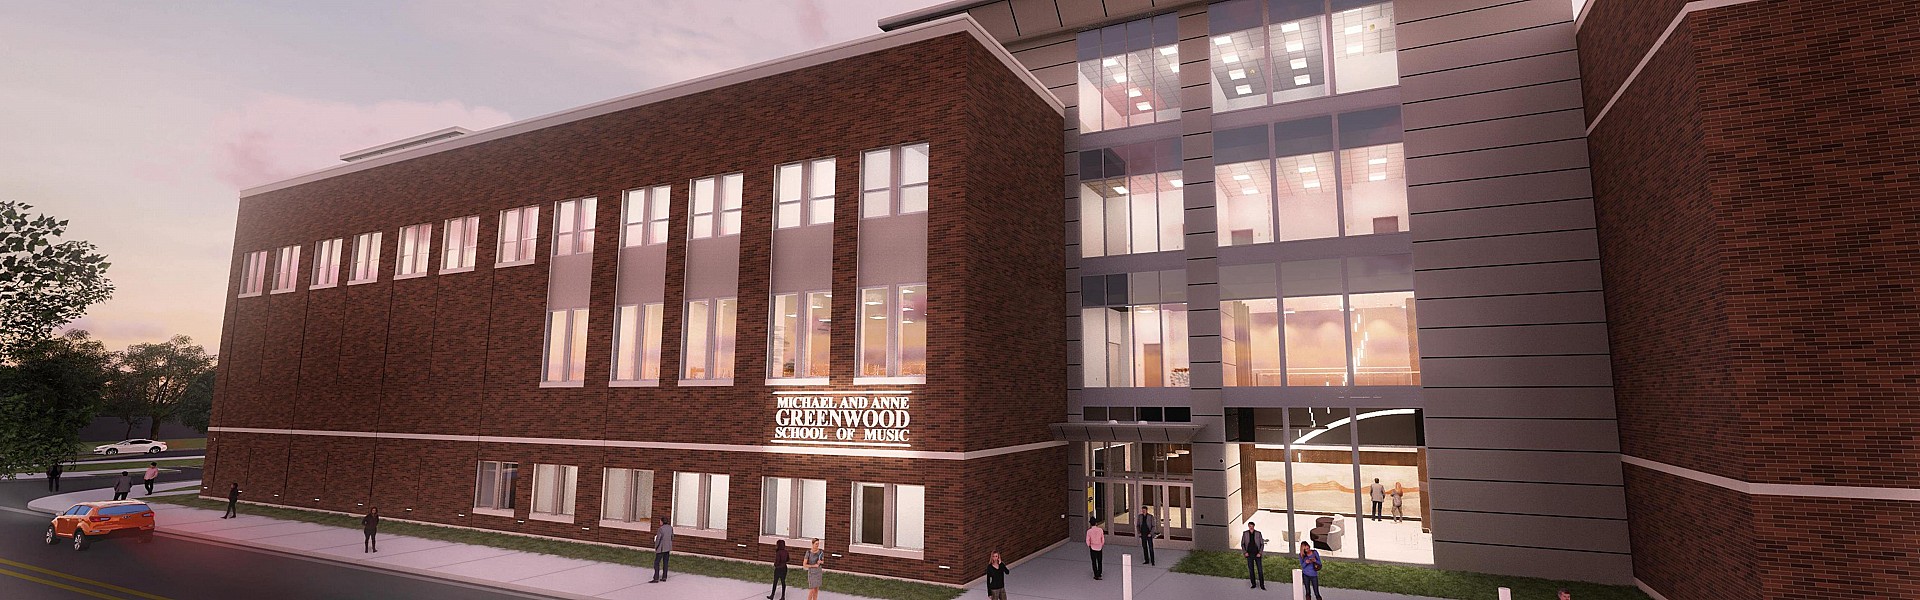 Michael and Anne Greenwood School of Music Breaks Ground